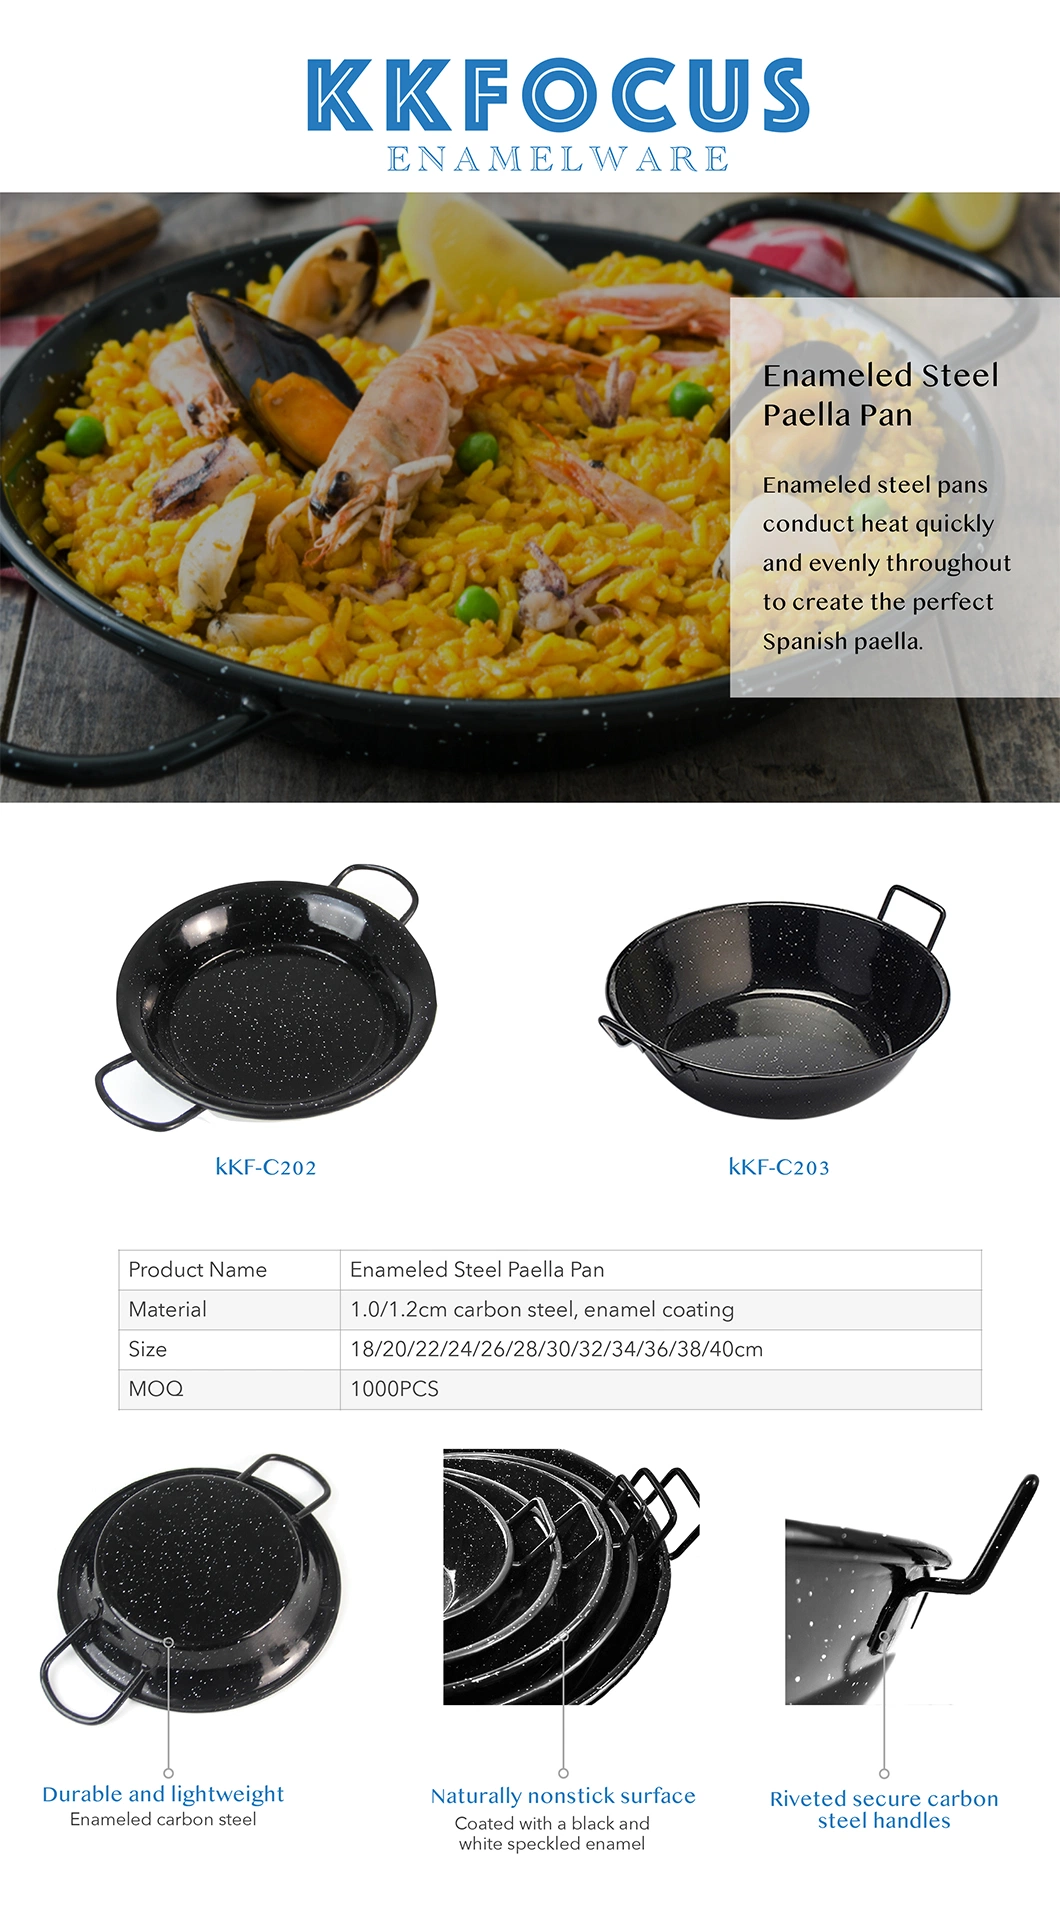 Enameled Steel Paella Pan Perfect for Camping and Outdoor Cooking 18-40cm